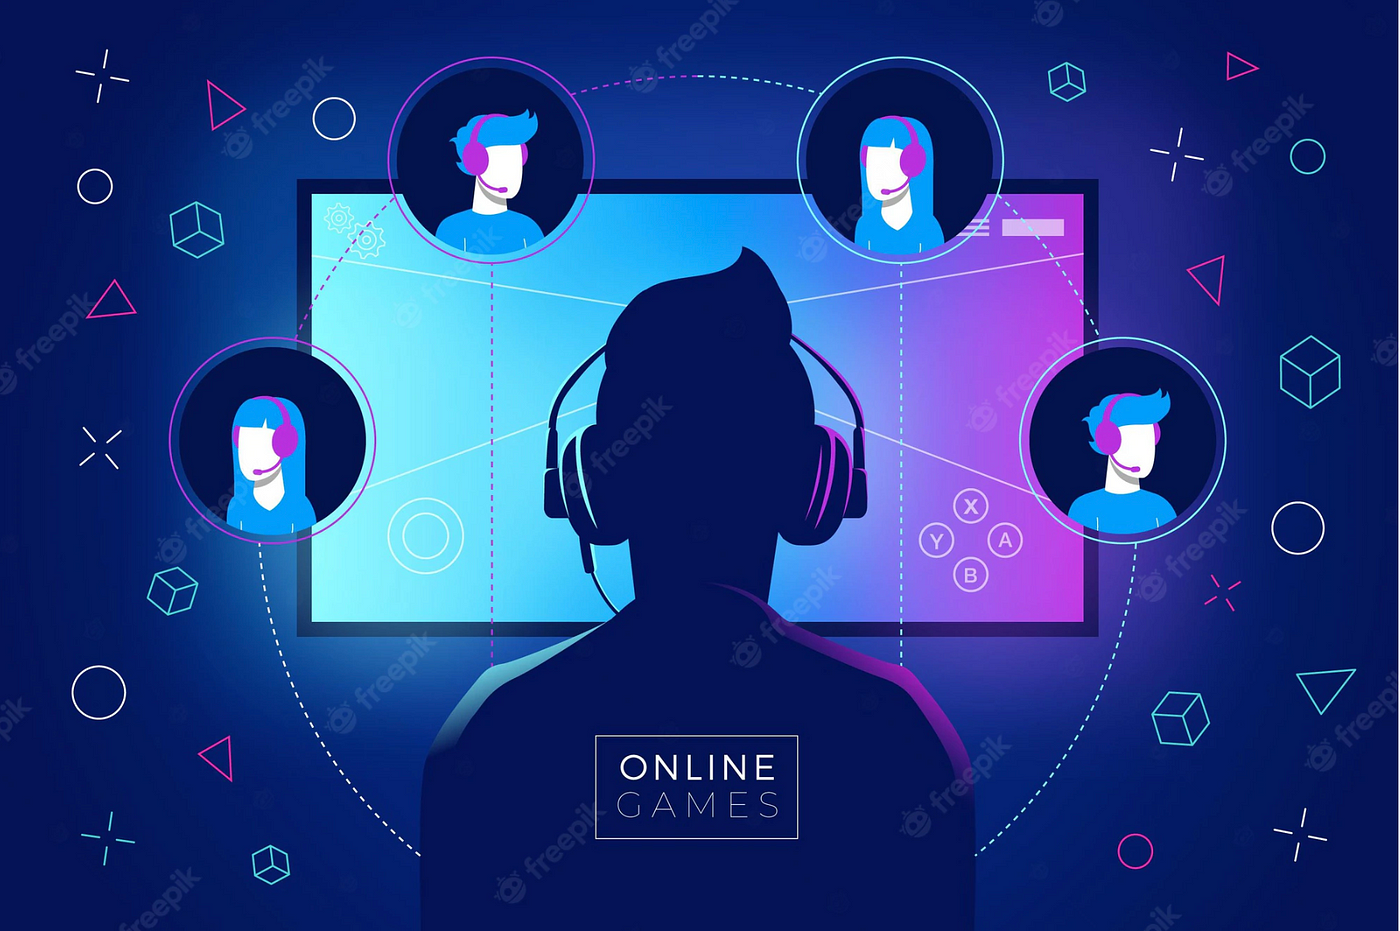 An Opinion on the Benefits of Online Games